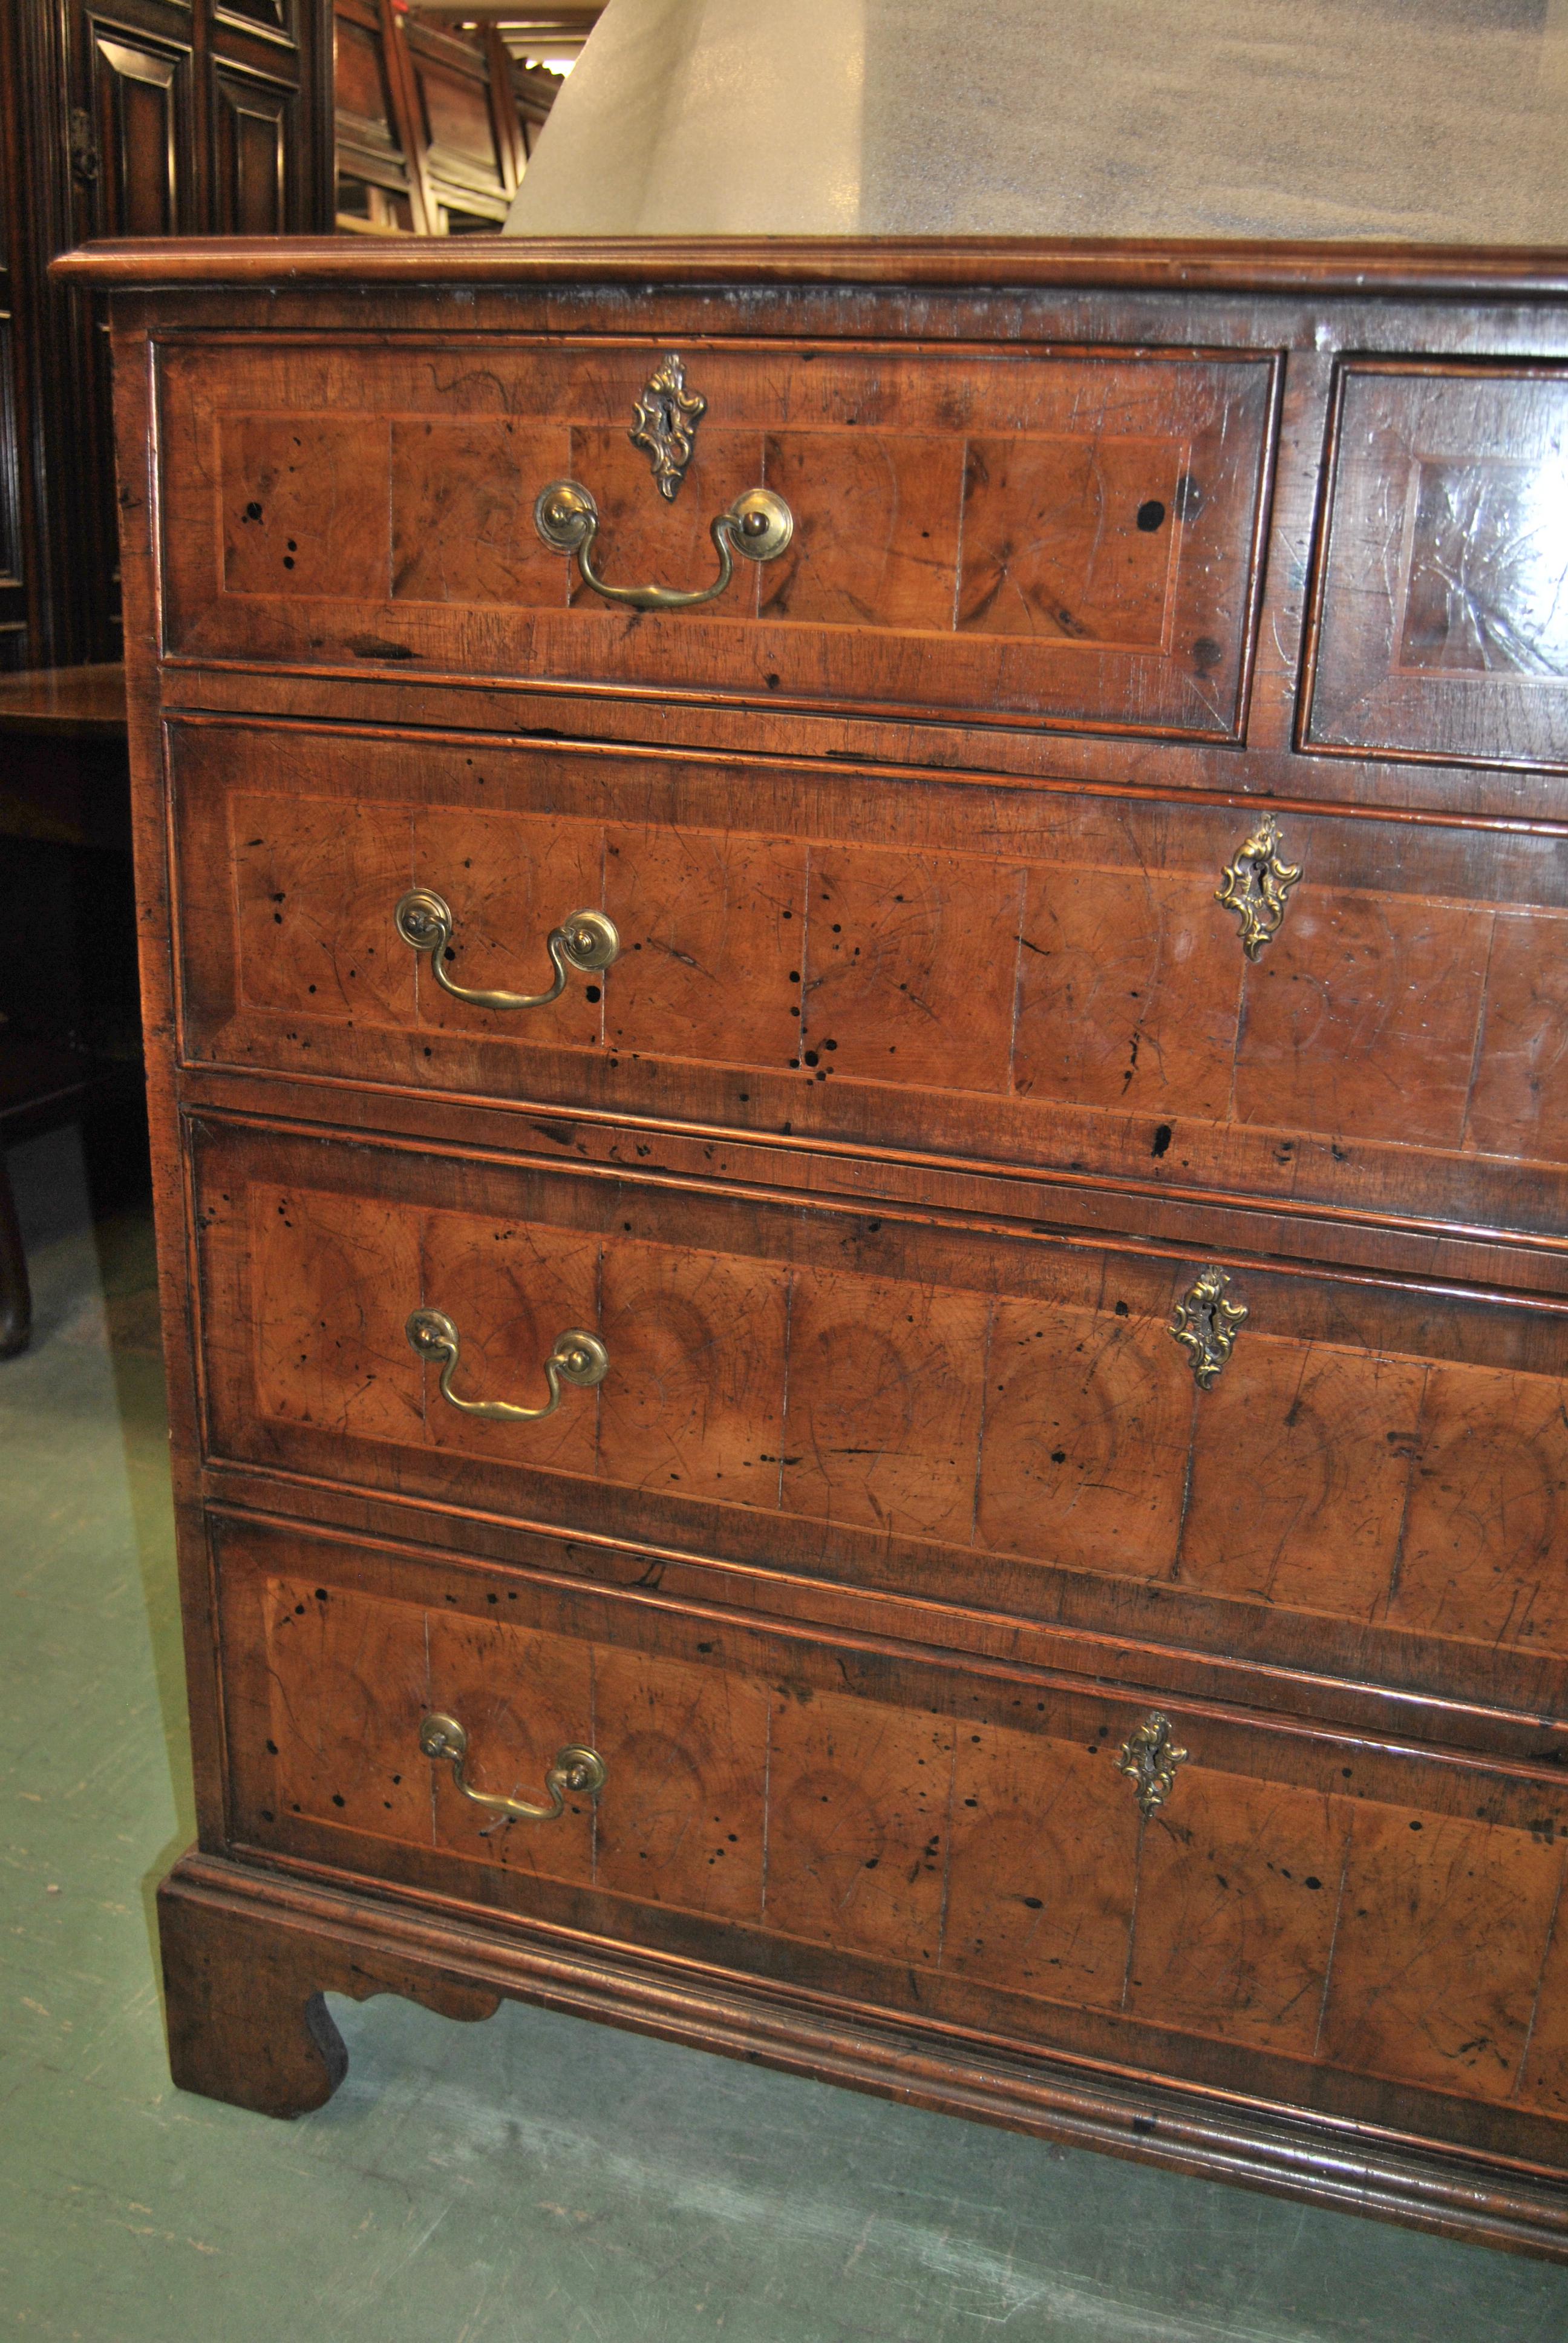 This is a chest of drawers / dresser, done in an oyster cut of walnut, that was made in England, circa 1800. The top of the chest has a nicely molded edge and is banded in walnut with a string inlay of boxwood with an oyster cut of walnut to the